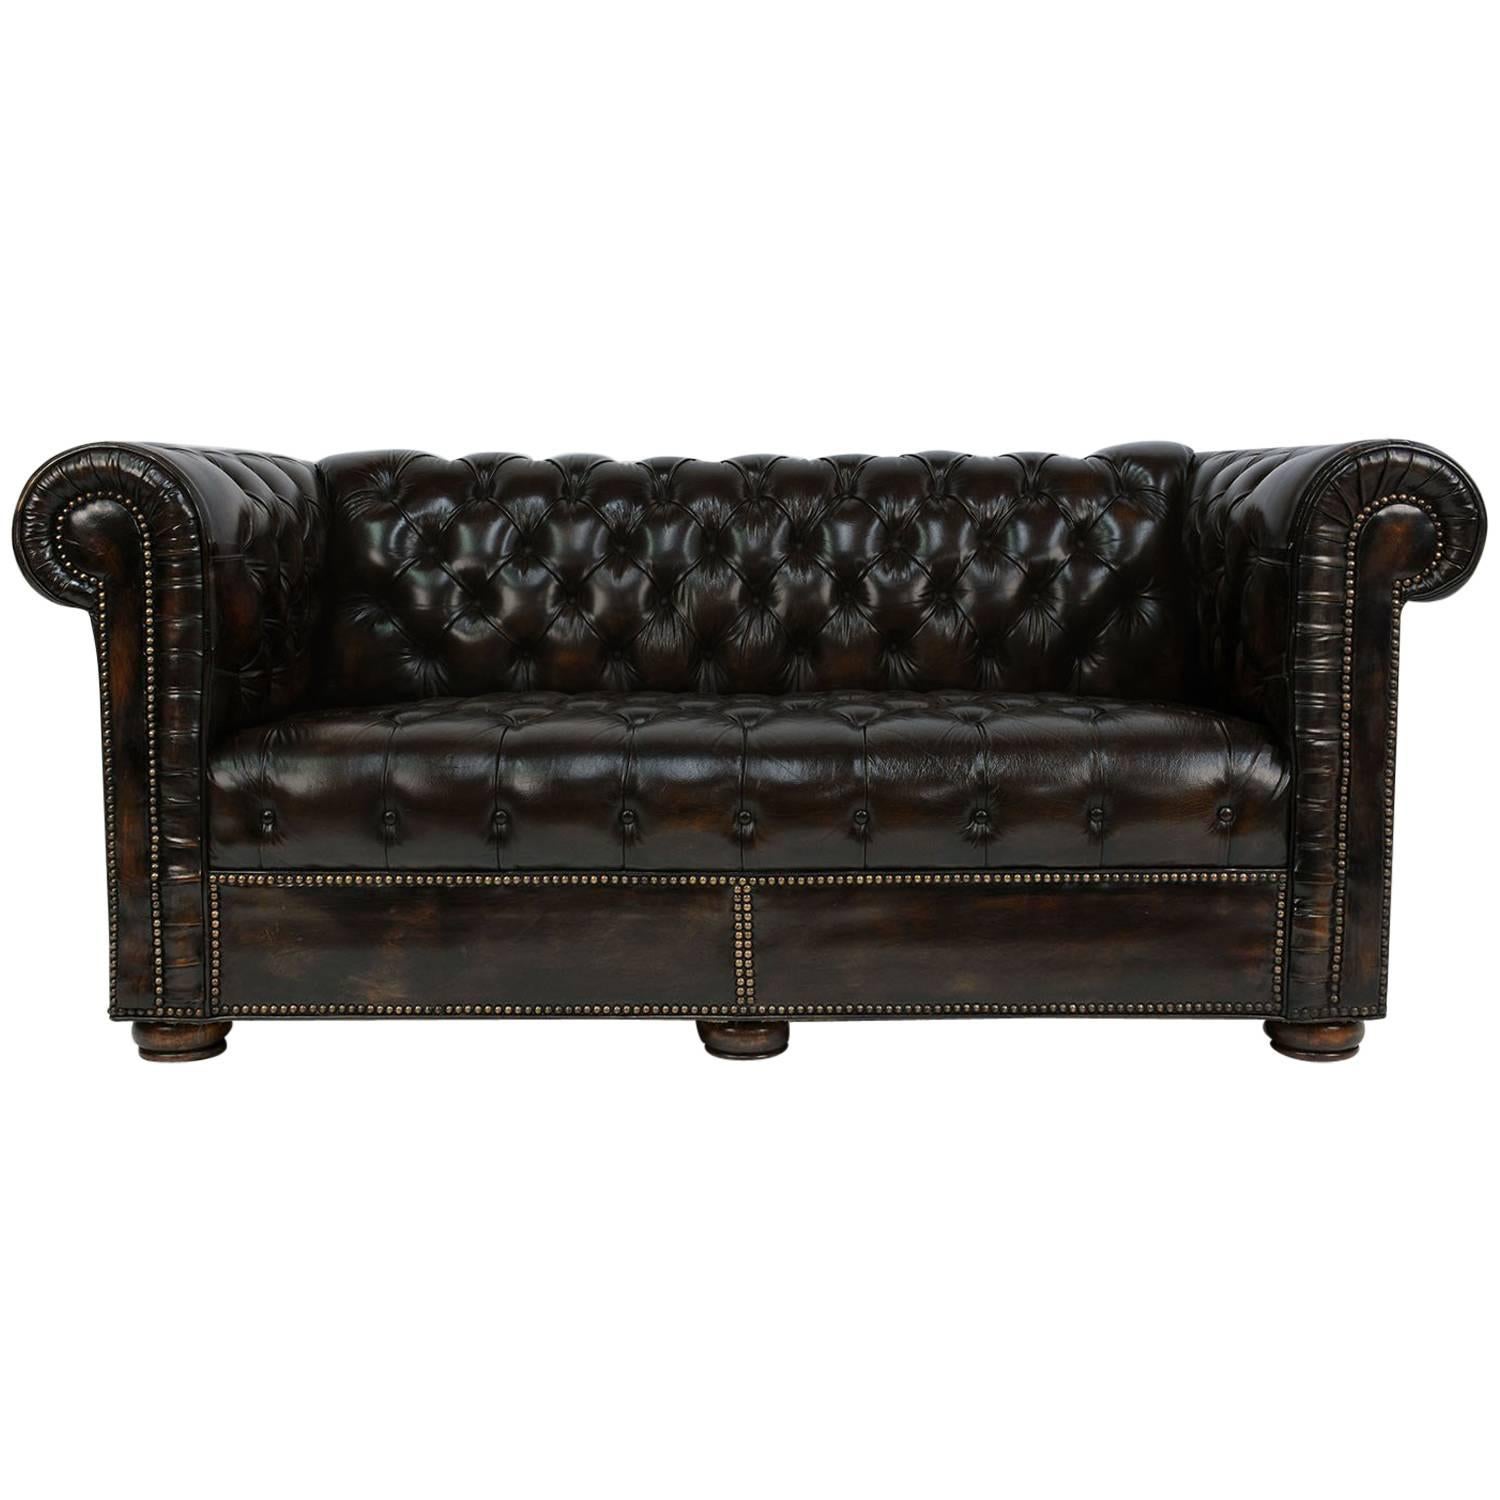 Leather Chesterfield Tufted Sofa or Loveseat